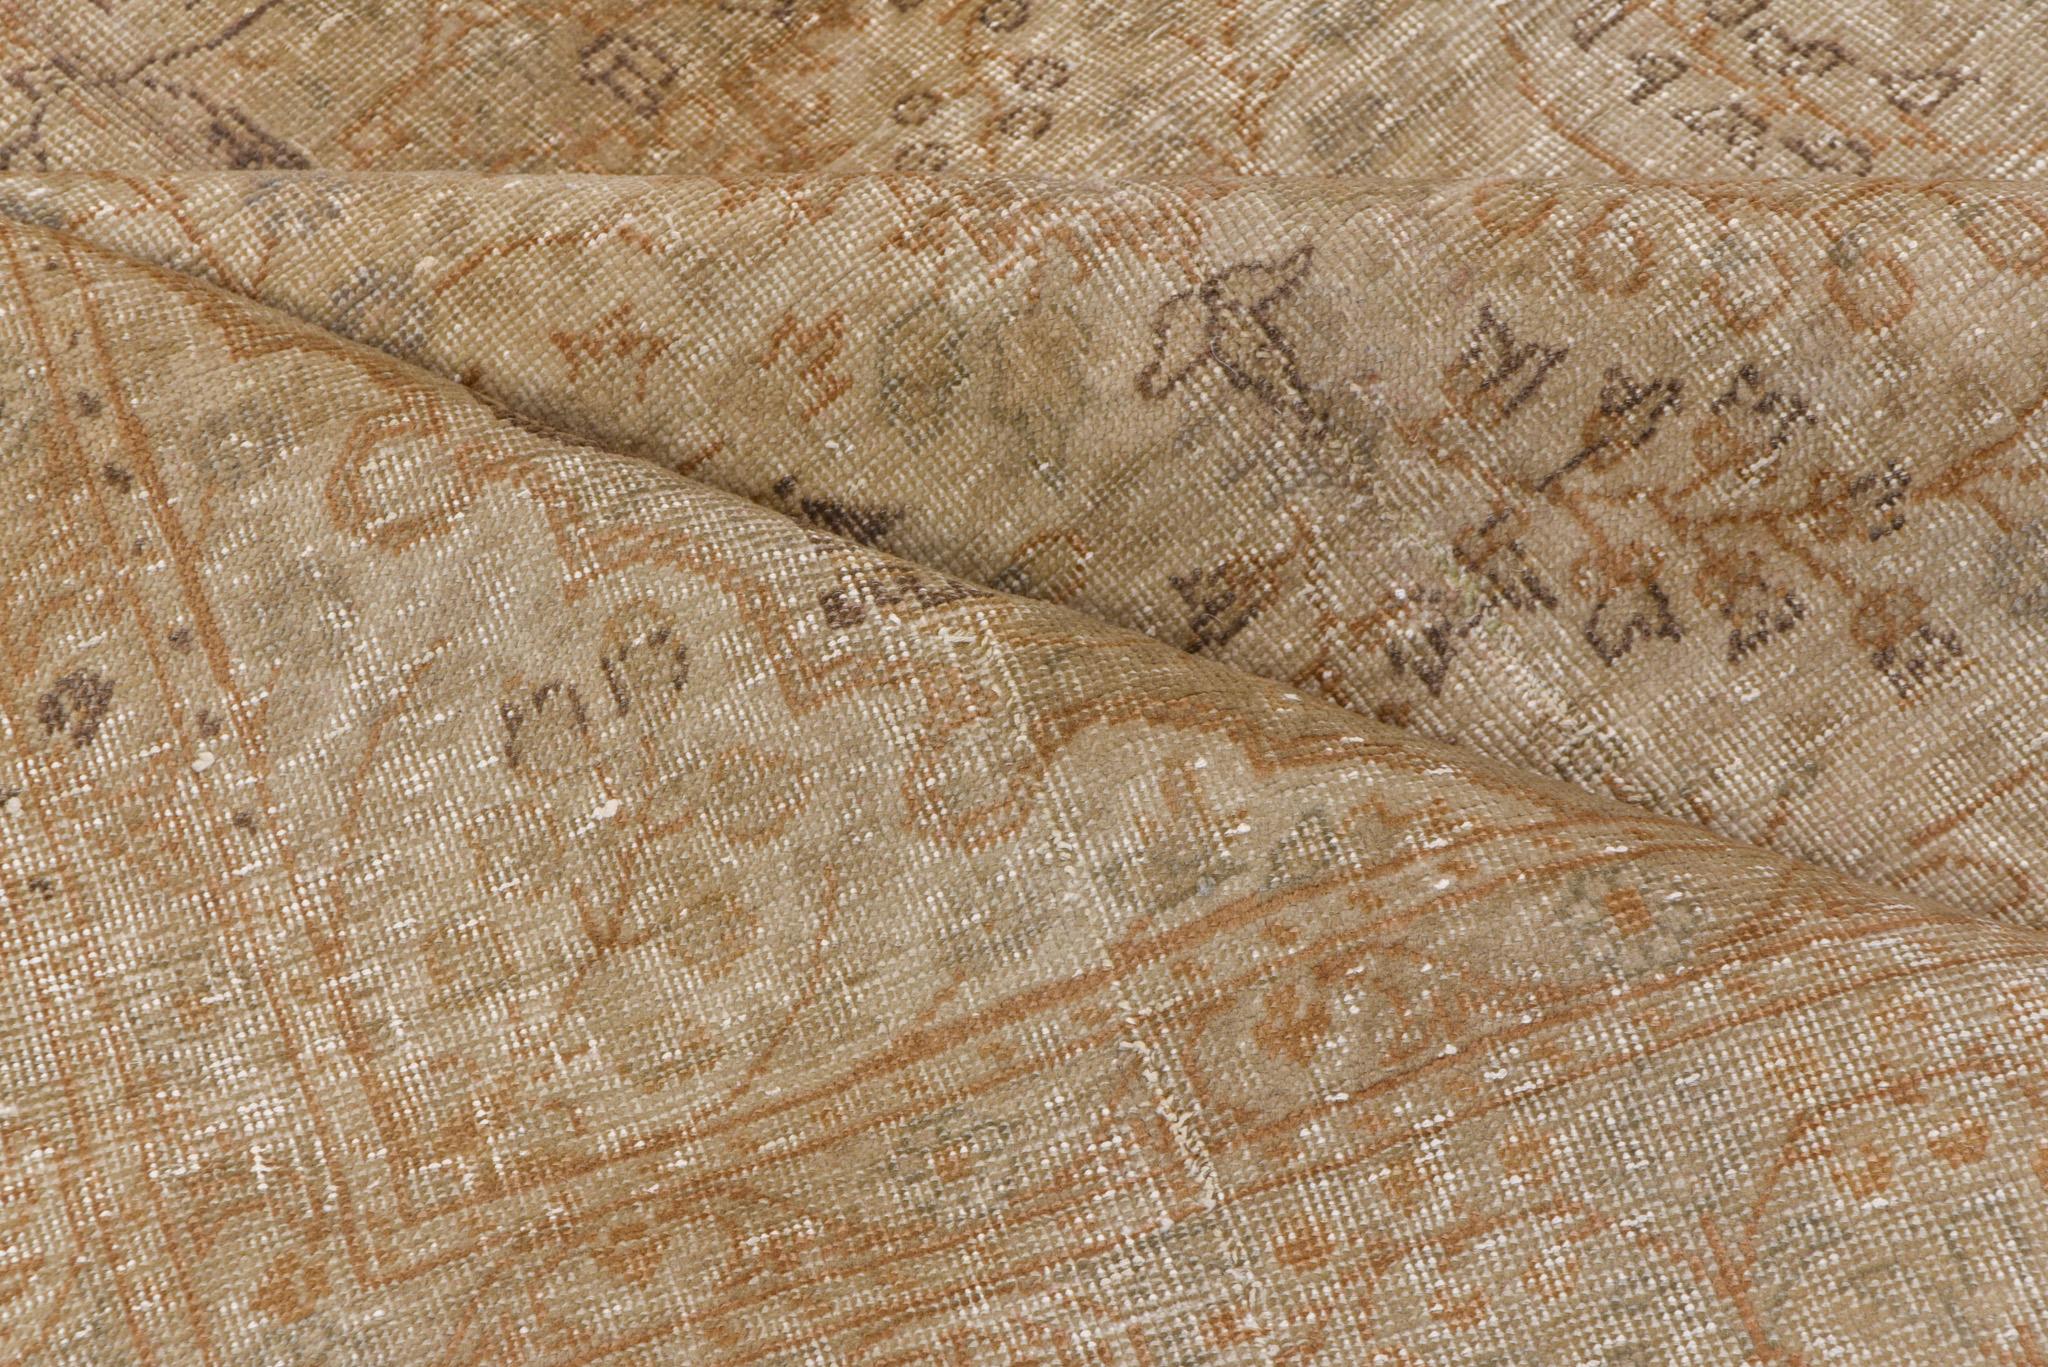 Eliko Rugs by David Ariel Formal Antique Turkish Sivas Rug, Neutral Palette In Good Condition For Sale In New York, NY